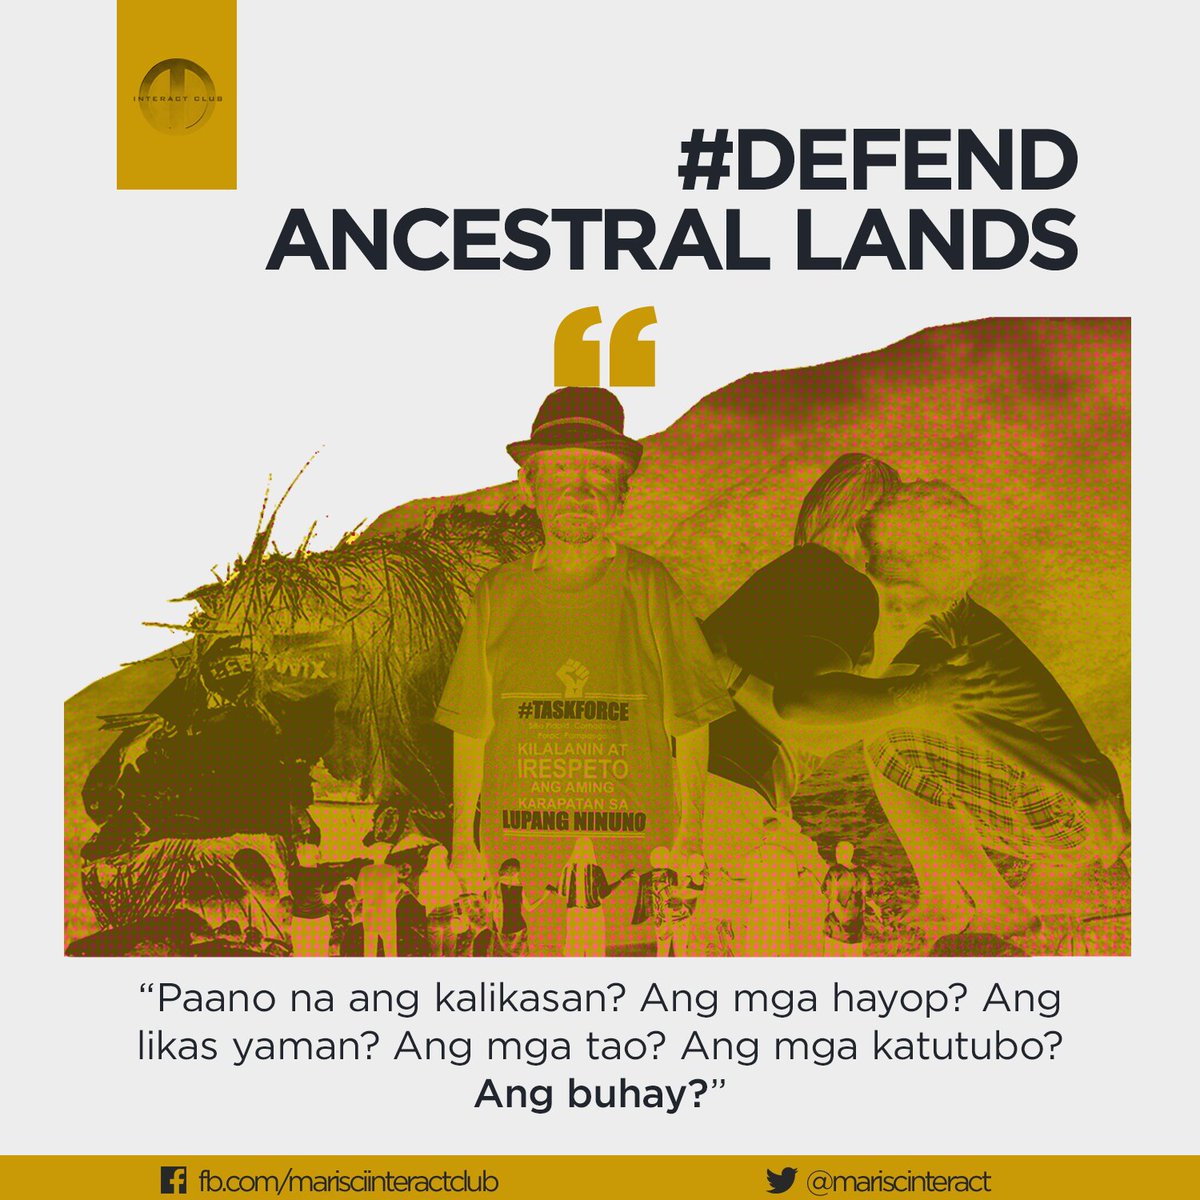 'With the construction of Clark Green City under PRRD's Build Build Build program, around 20 000 Aeta families are to be displaced due to the exploitation of big foreign private companies.'

#DefendTheAeta
#DefendAncestralLands
#NoToClarkGreenCity 
#NoToDevelopmentAggression